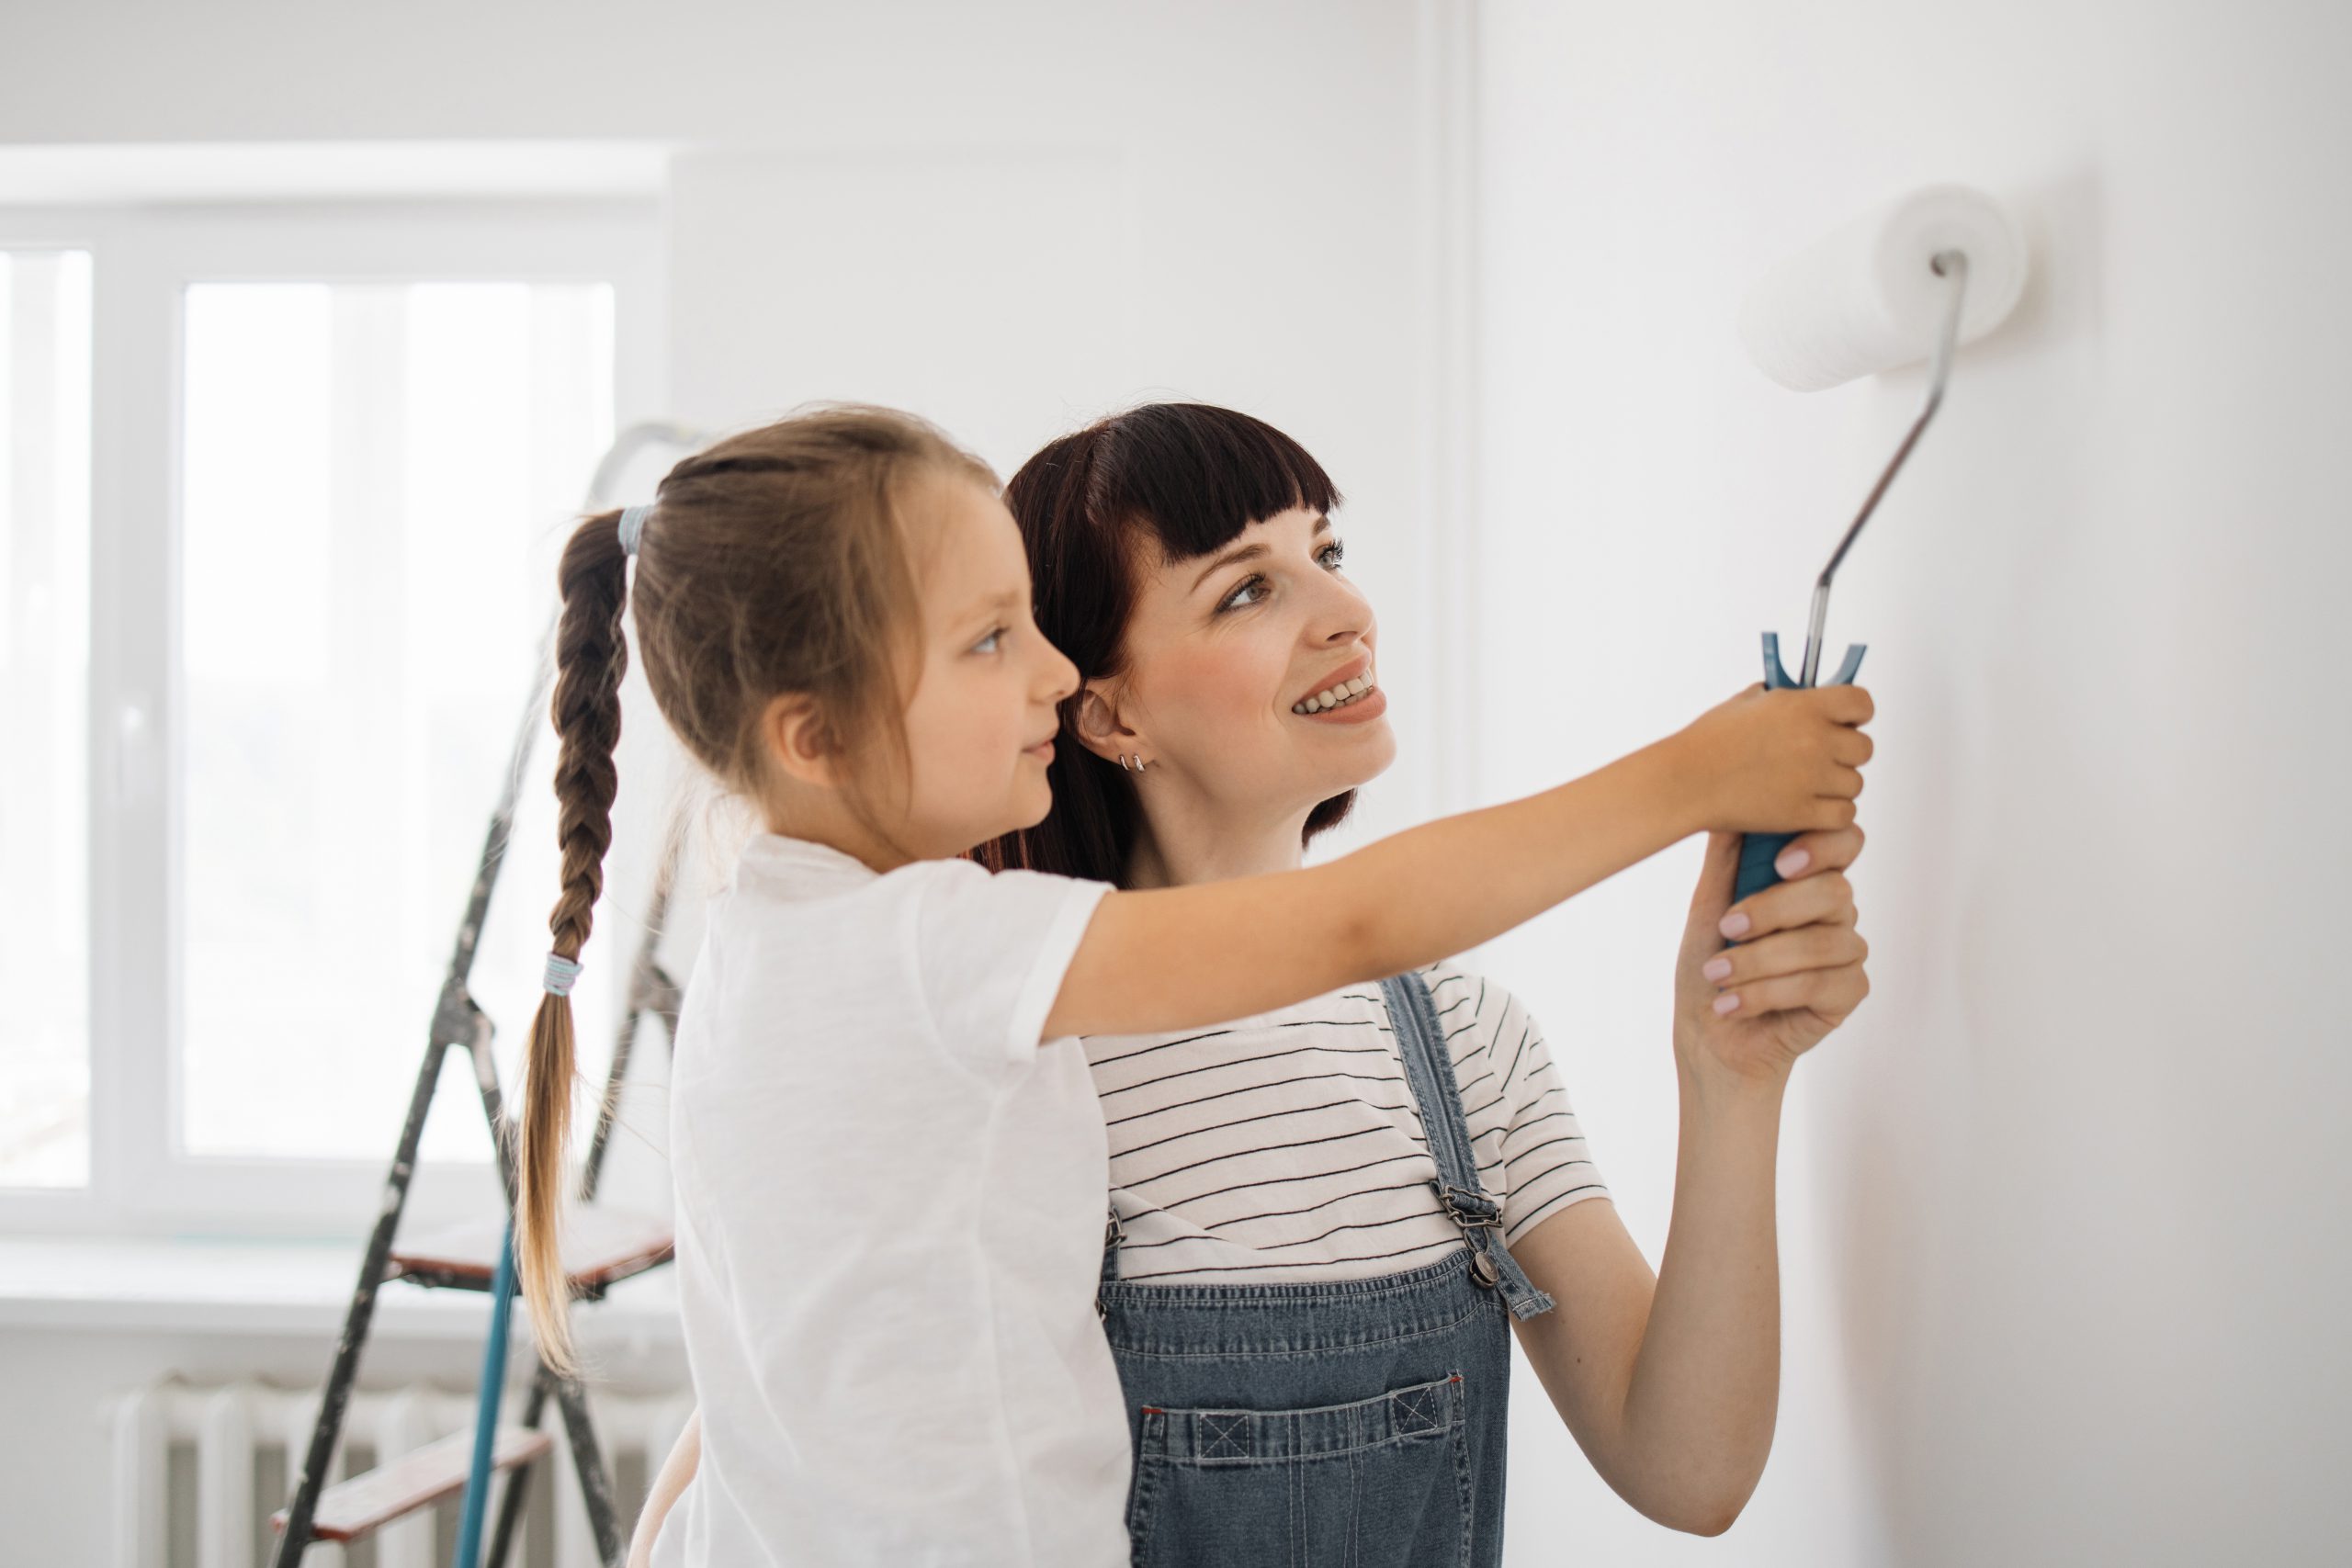 Happy Family Mother And Daughter Paint The Wall With White Paint.